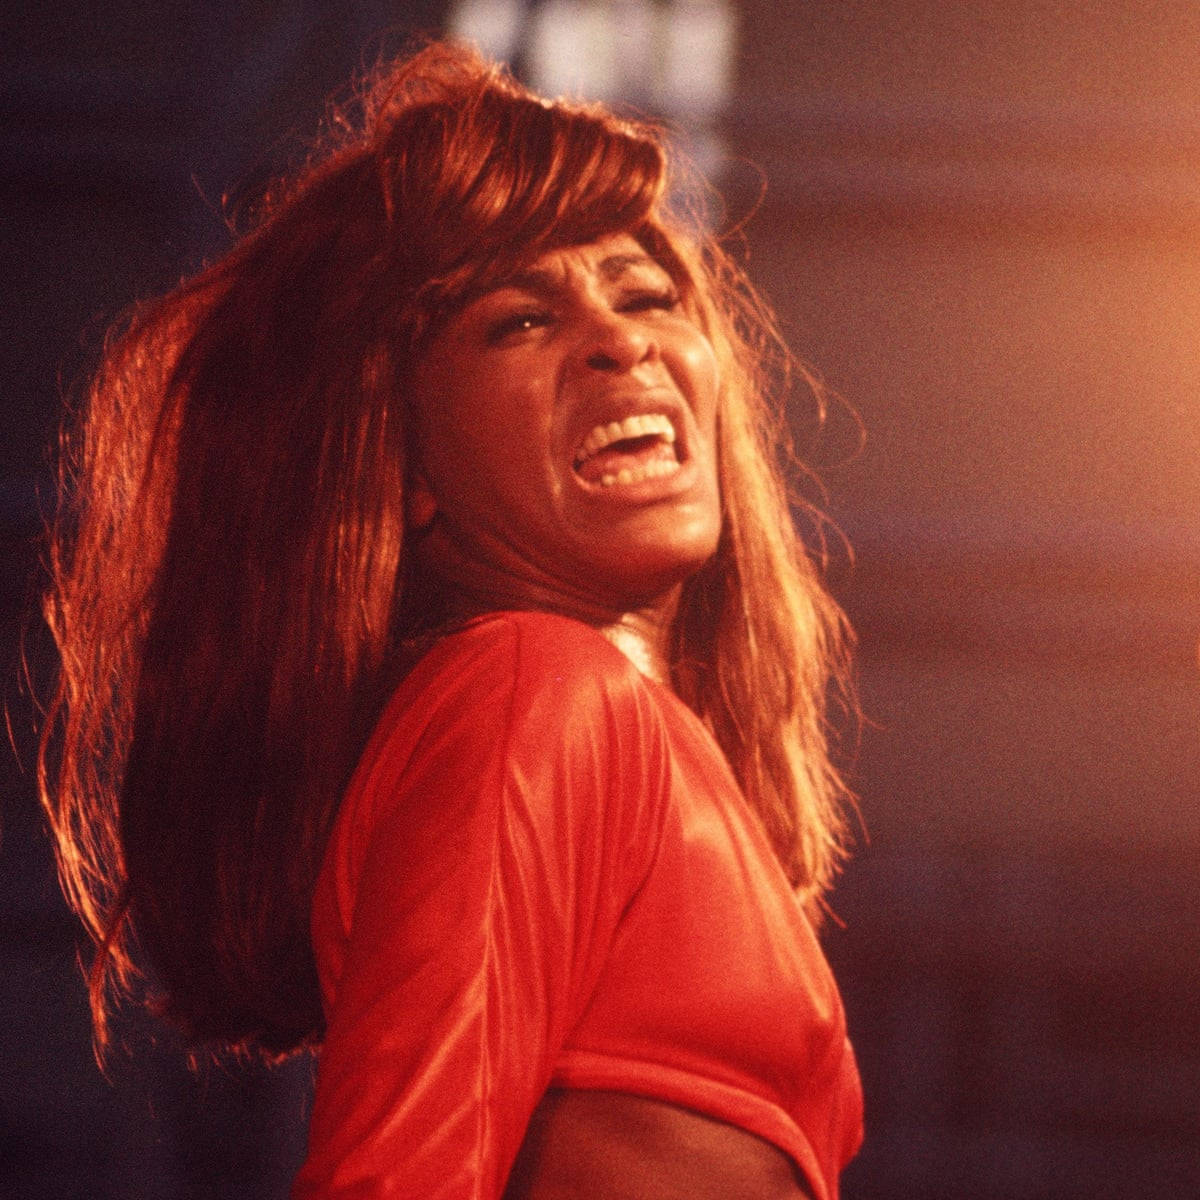 "Tina Turner Delivering High Energy Performance in the 1960s" Wallpaper